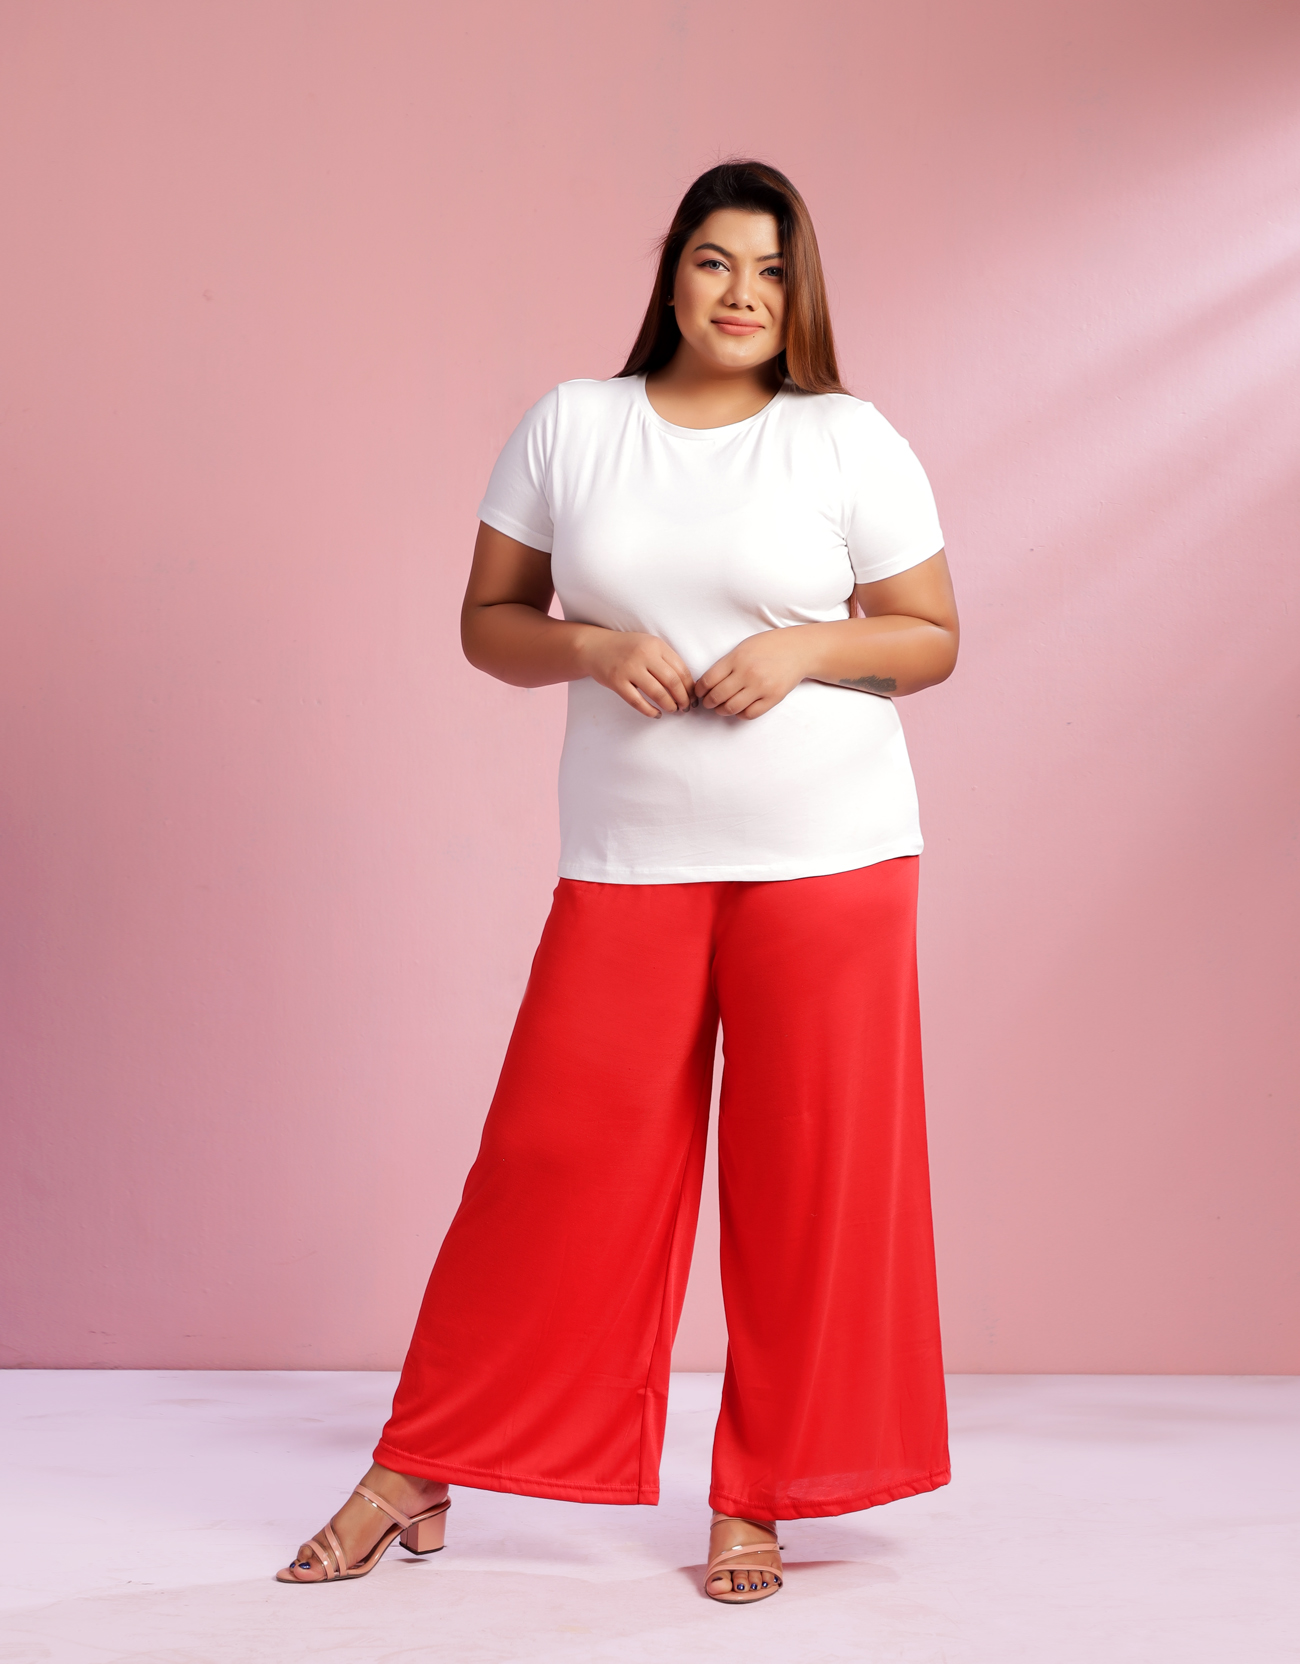 10 Types of Dressy Tops to Wear with Palazzo Pants in 2020-hoanganhbinhduong.edu.vn